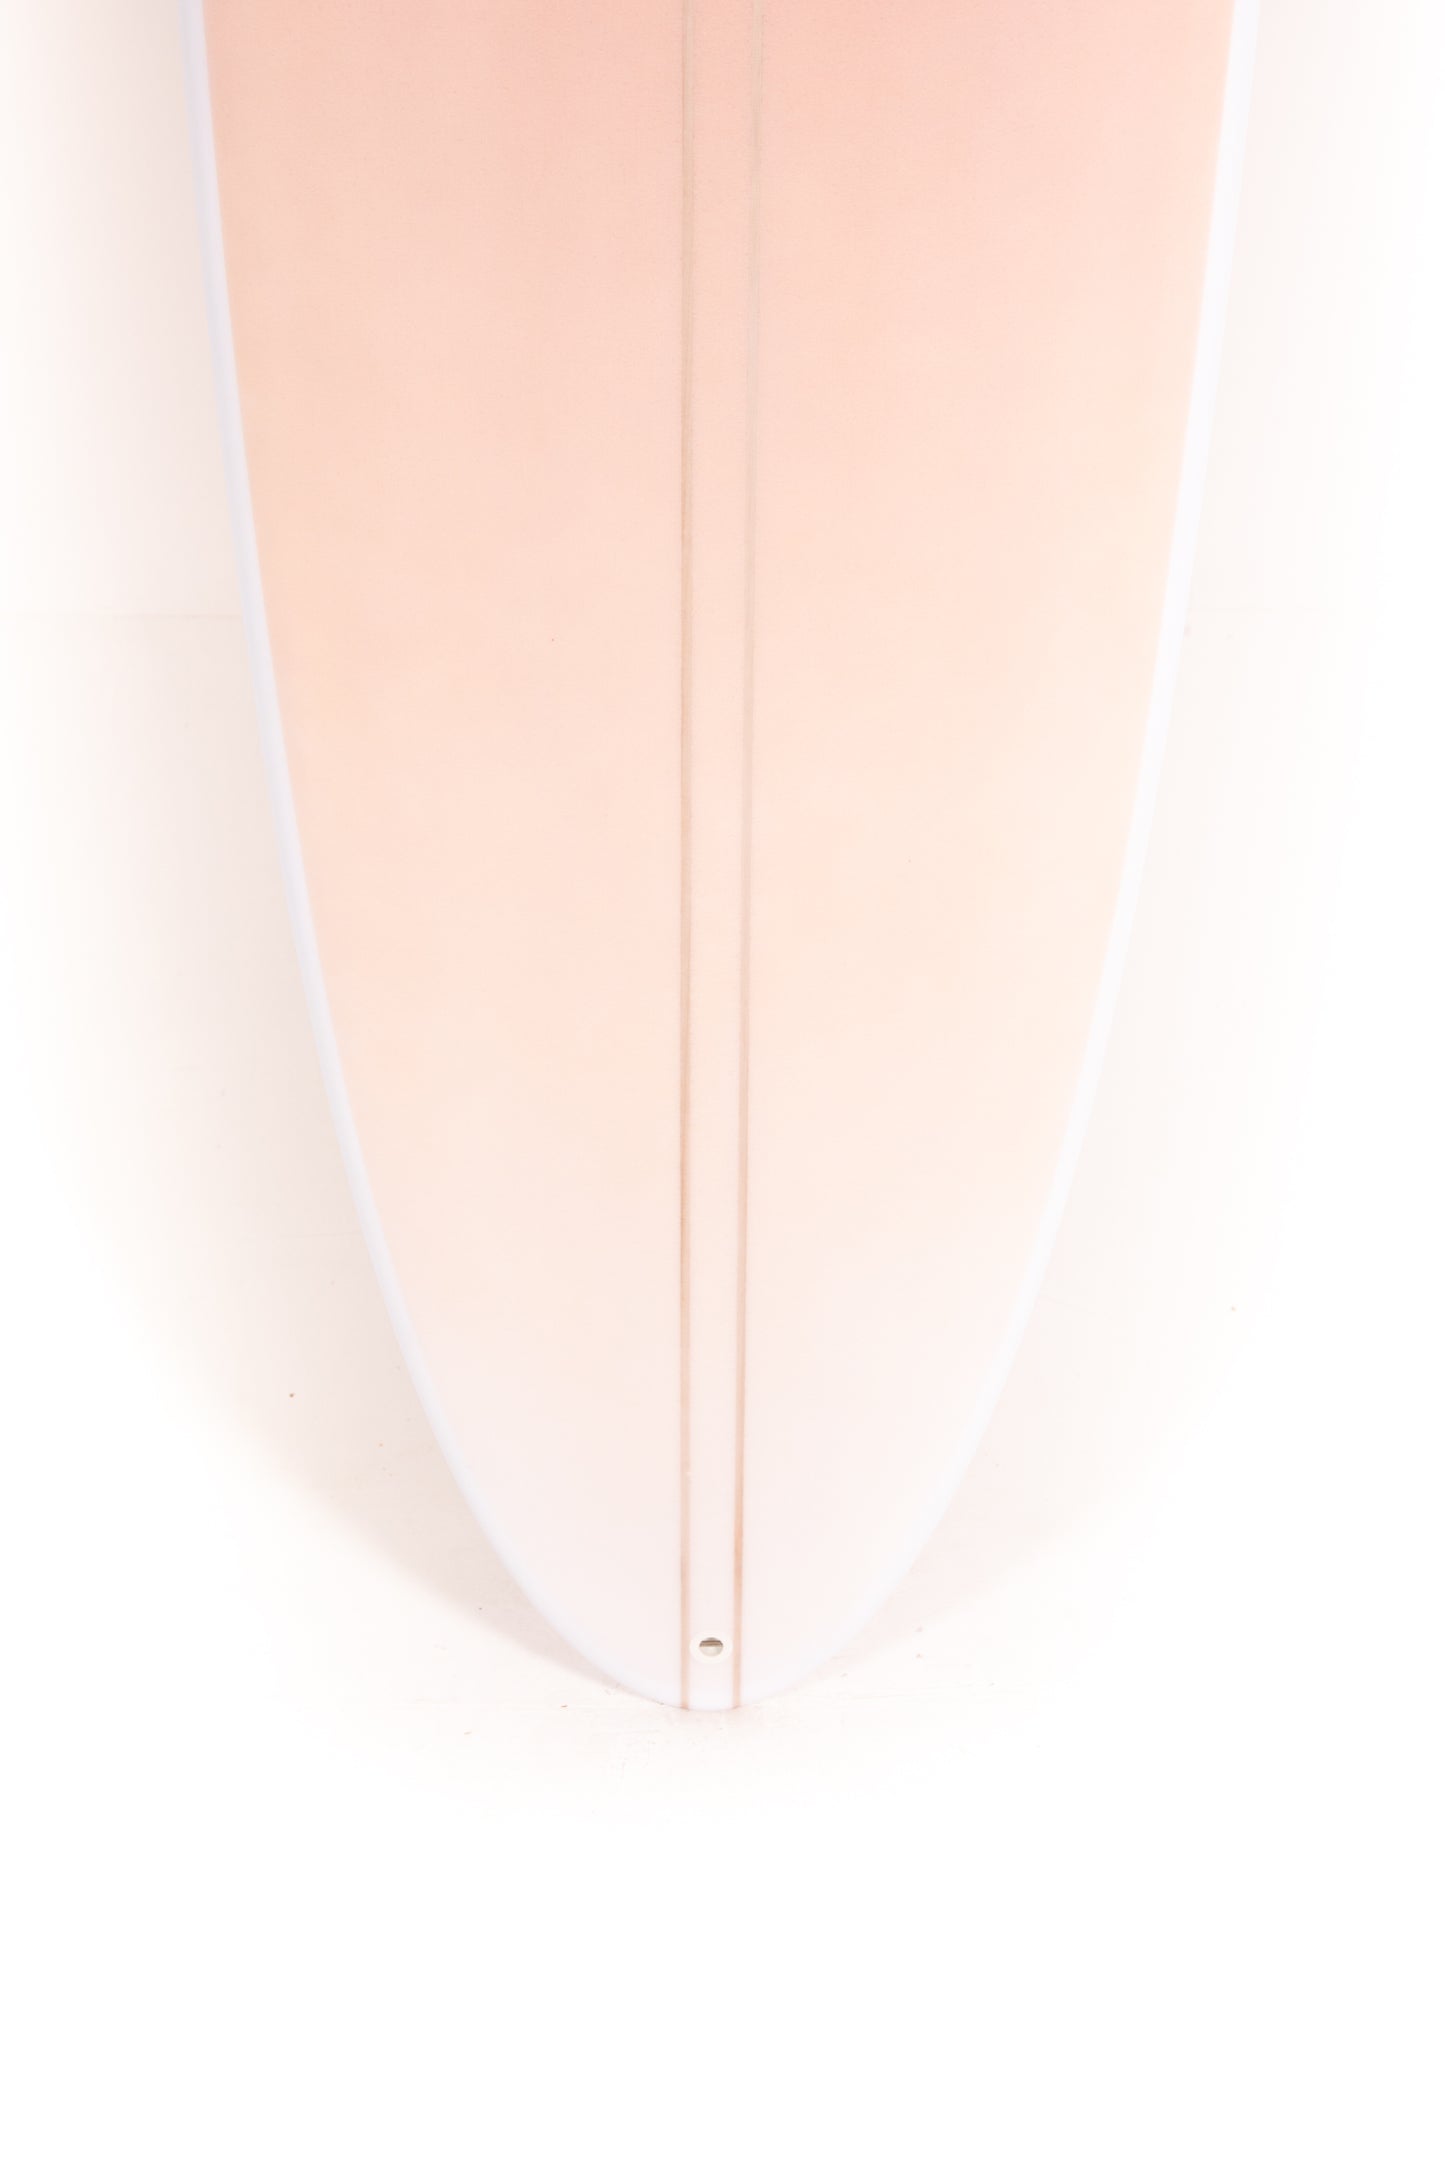 
                  
                    Pukas-Surf-Shop-Indio-Surfboards-The-Egg-red-7_2
                  
                